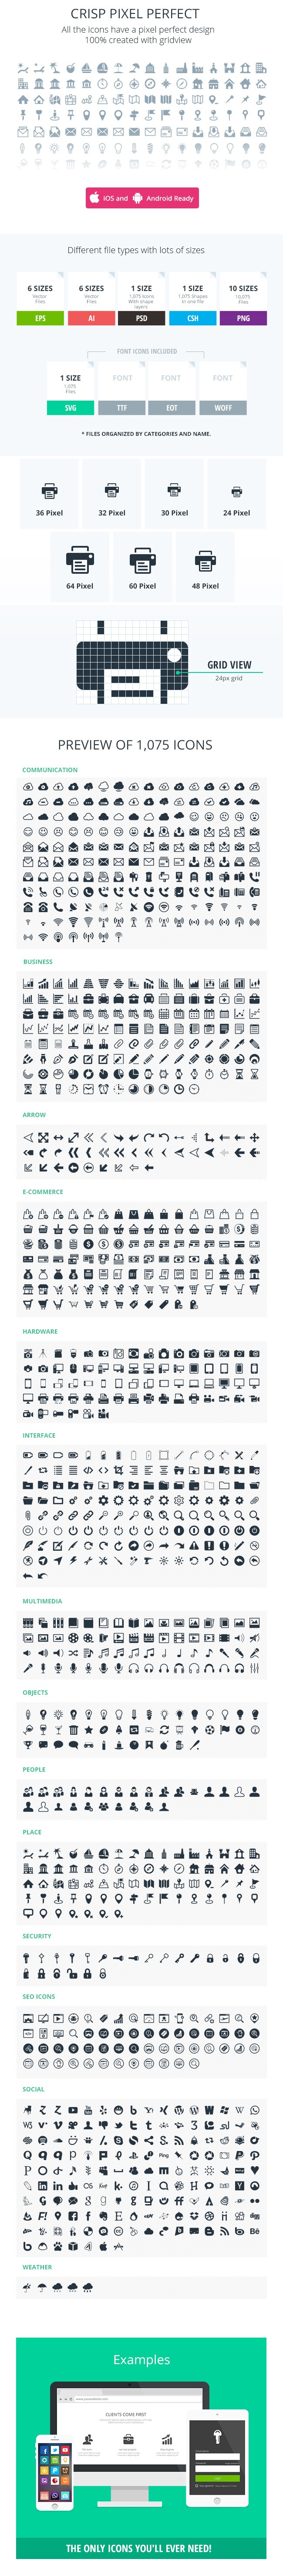 1075-pixel-perfect-icons-Iconsolid-preview-big.jpg